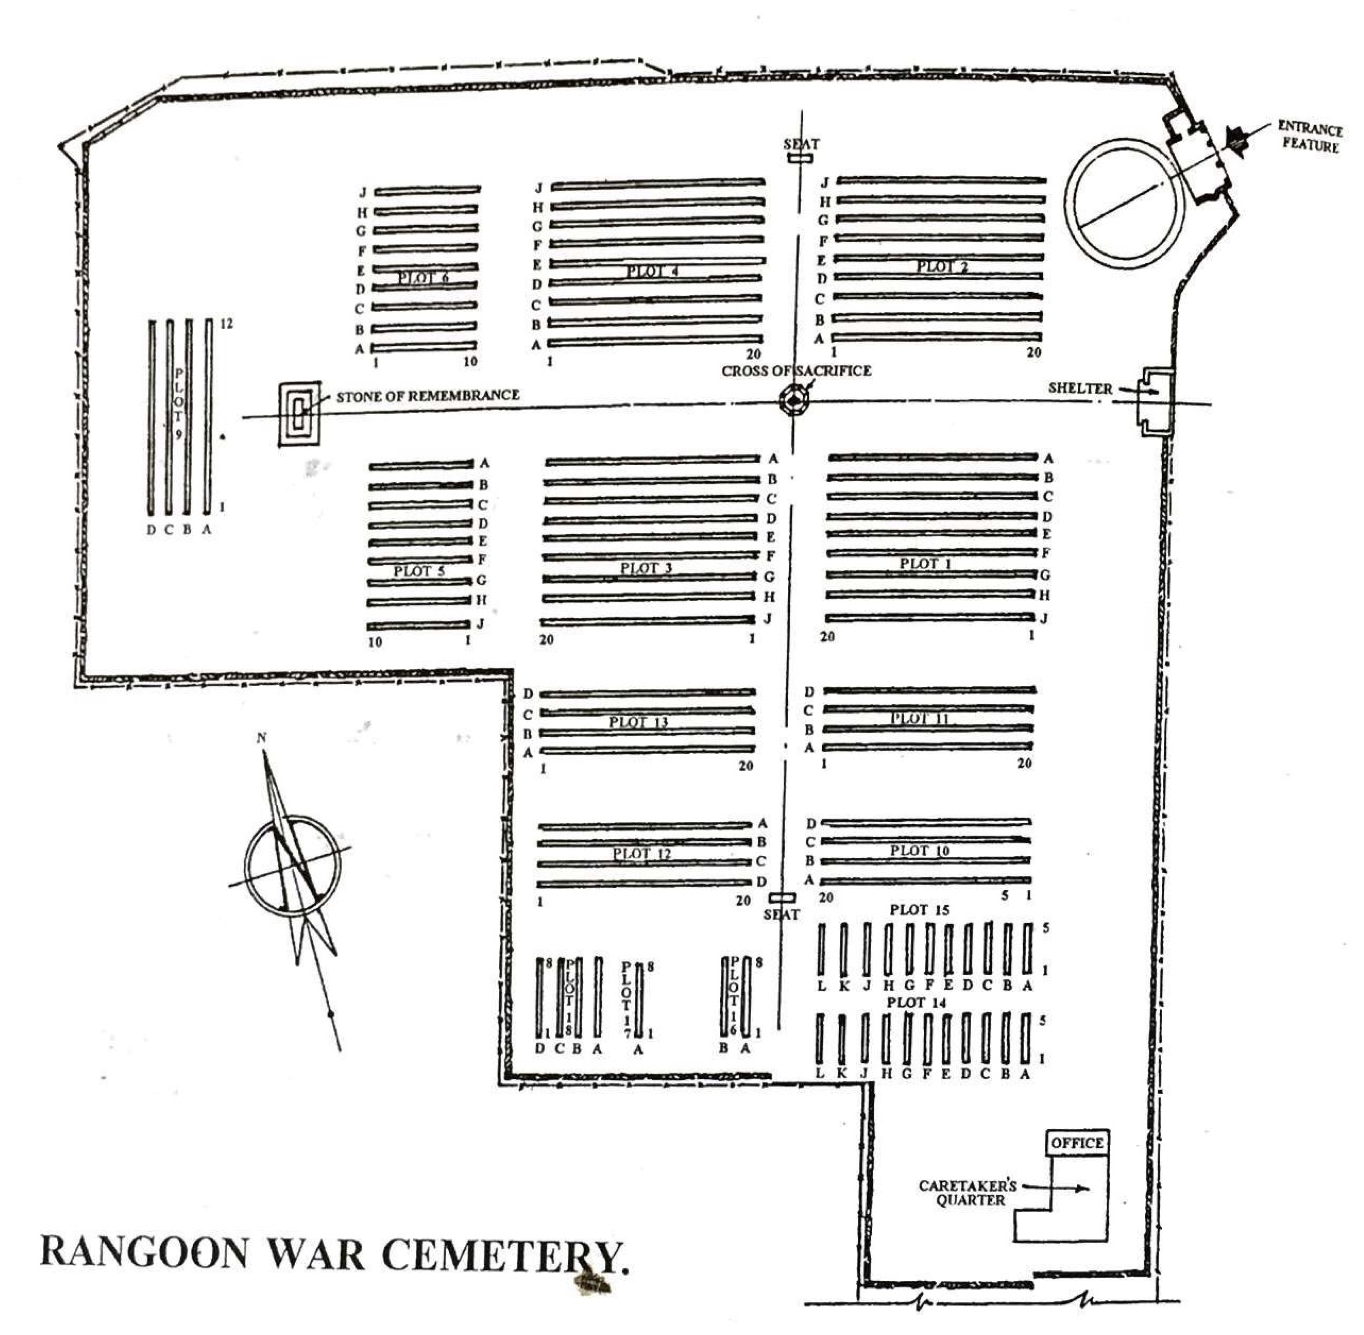 Photo by Author — map of the Rangoon War Cemetery